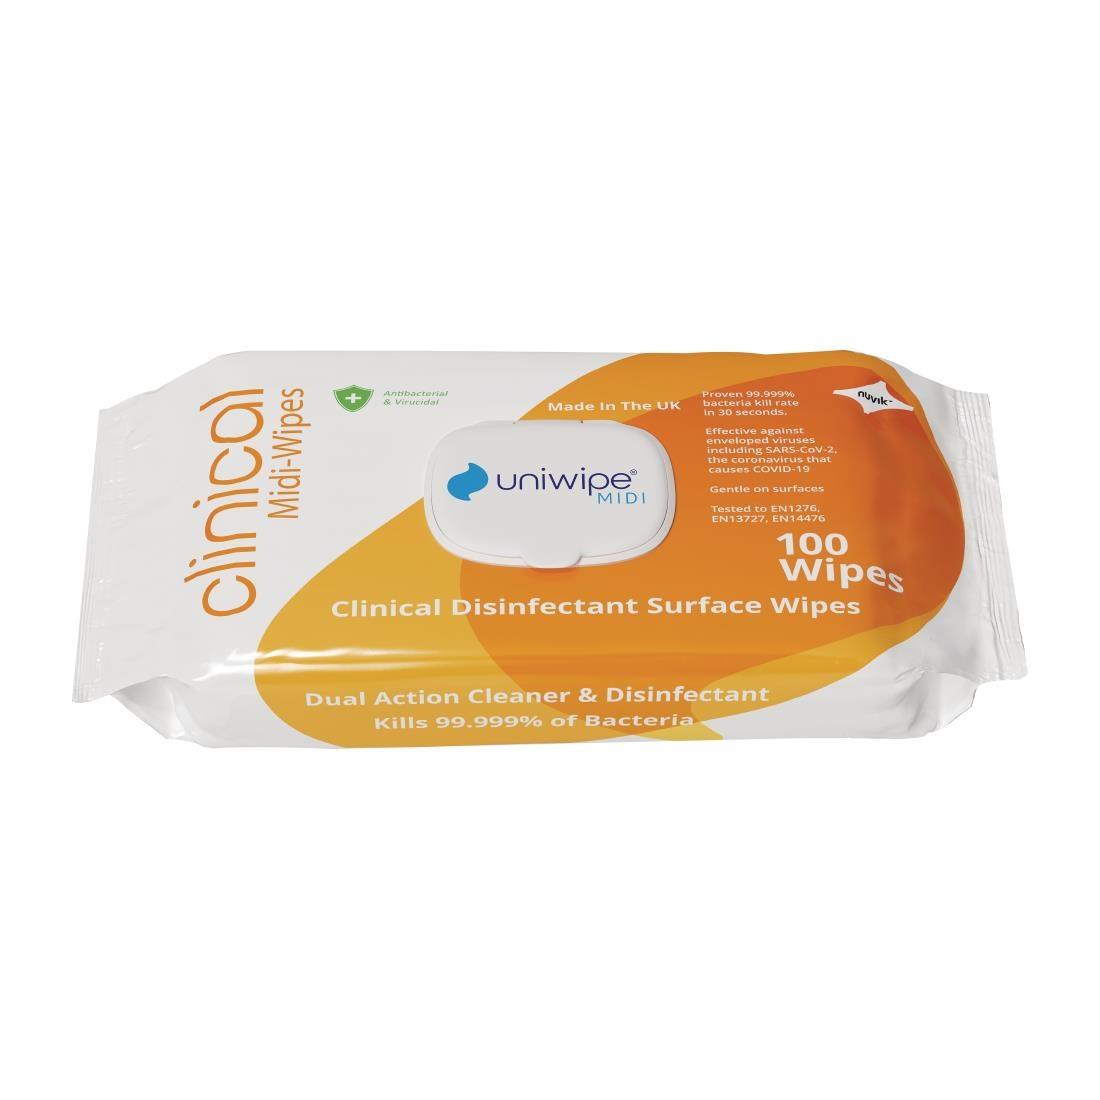 Uniwipe Clinical Disinfectant Midi-Wipes (Pack 100) - FS703  - 1